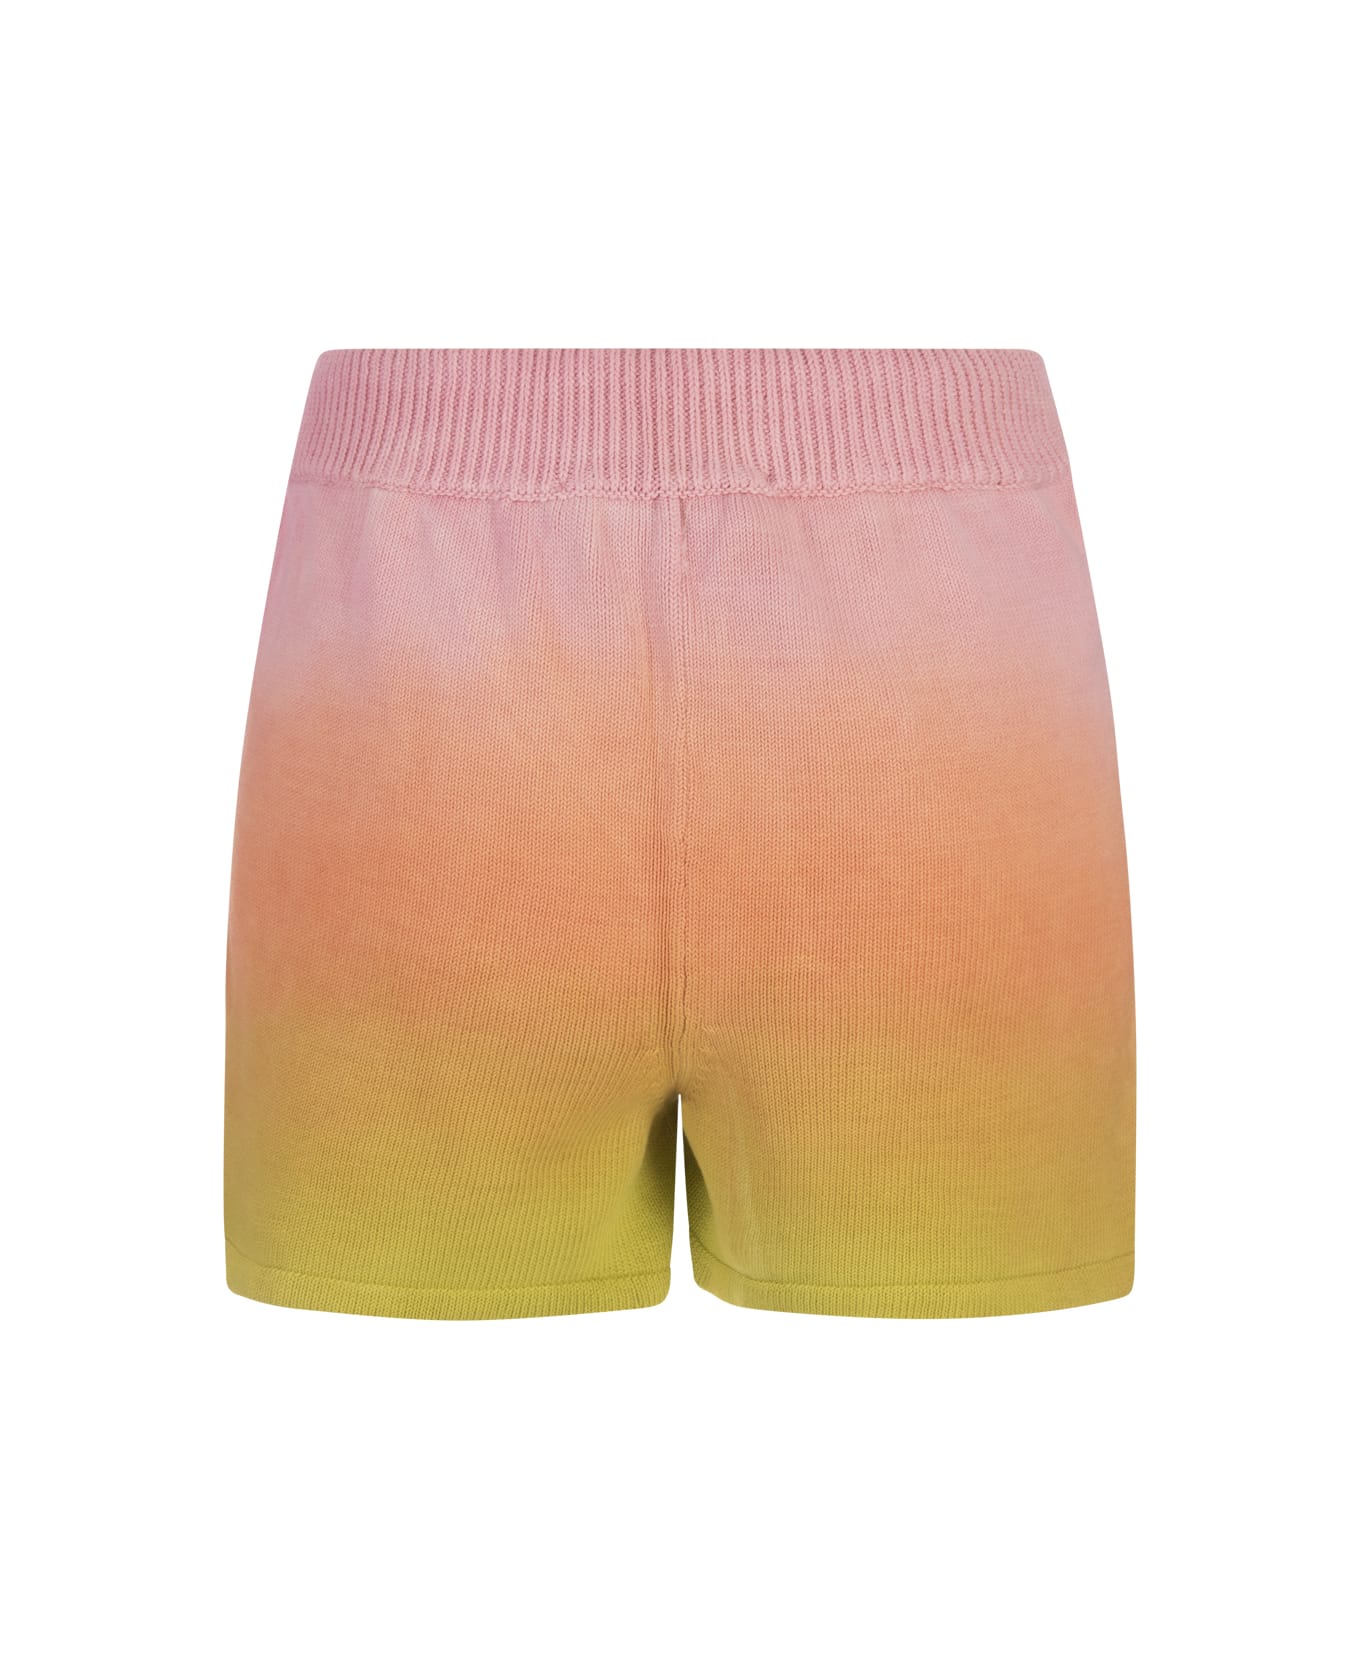 Barrow Multicoloured Knitted Shorts With Degradé Effect - Multicolour ショートパンツ